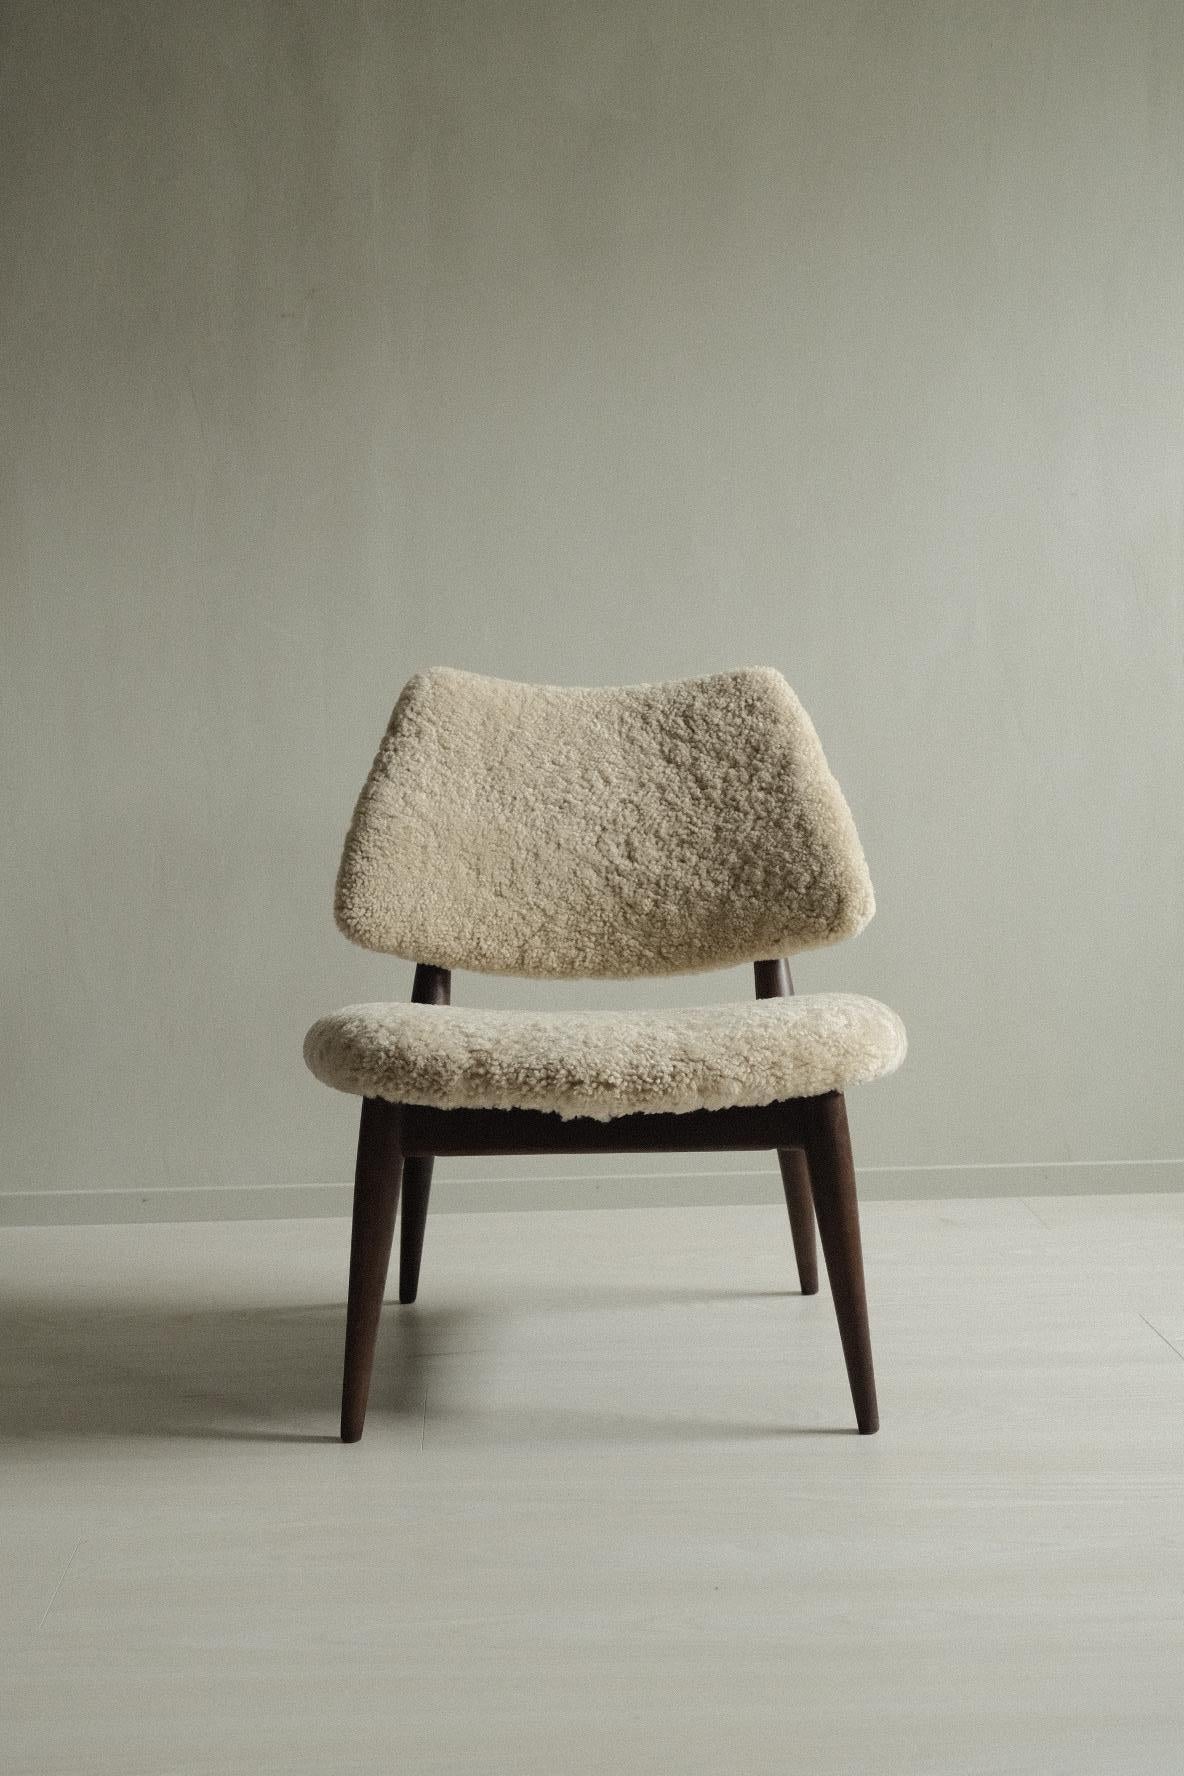 A beautiful and rare Scandinavian easy chair in premium natural color shearling. Legs of dark stained beech. Produced in Norway in the 1950s by unknown designer. 